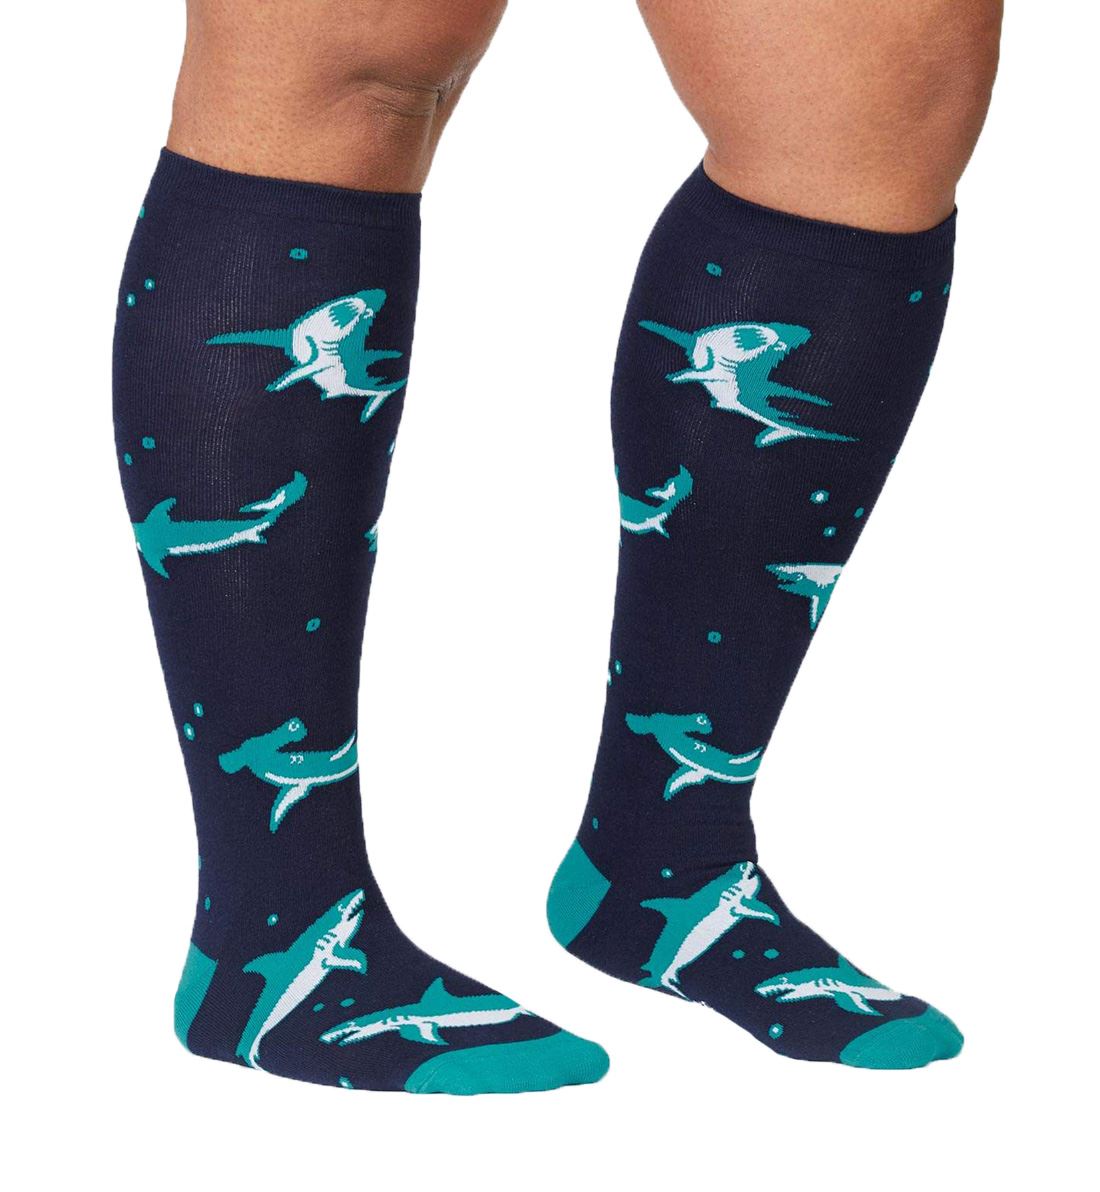 SOCK it to me Unisex Stretch-It Knee High Socks (s0050),Shark Attack - Shark Attack,One Size